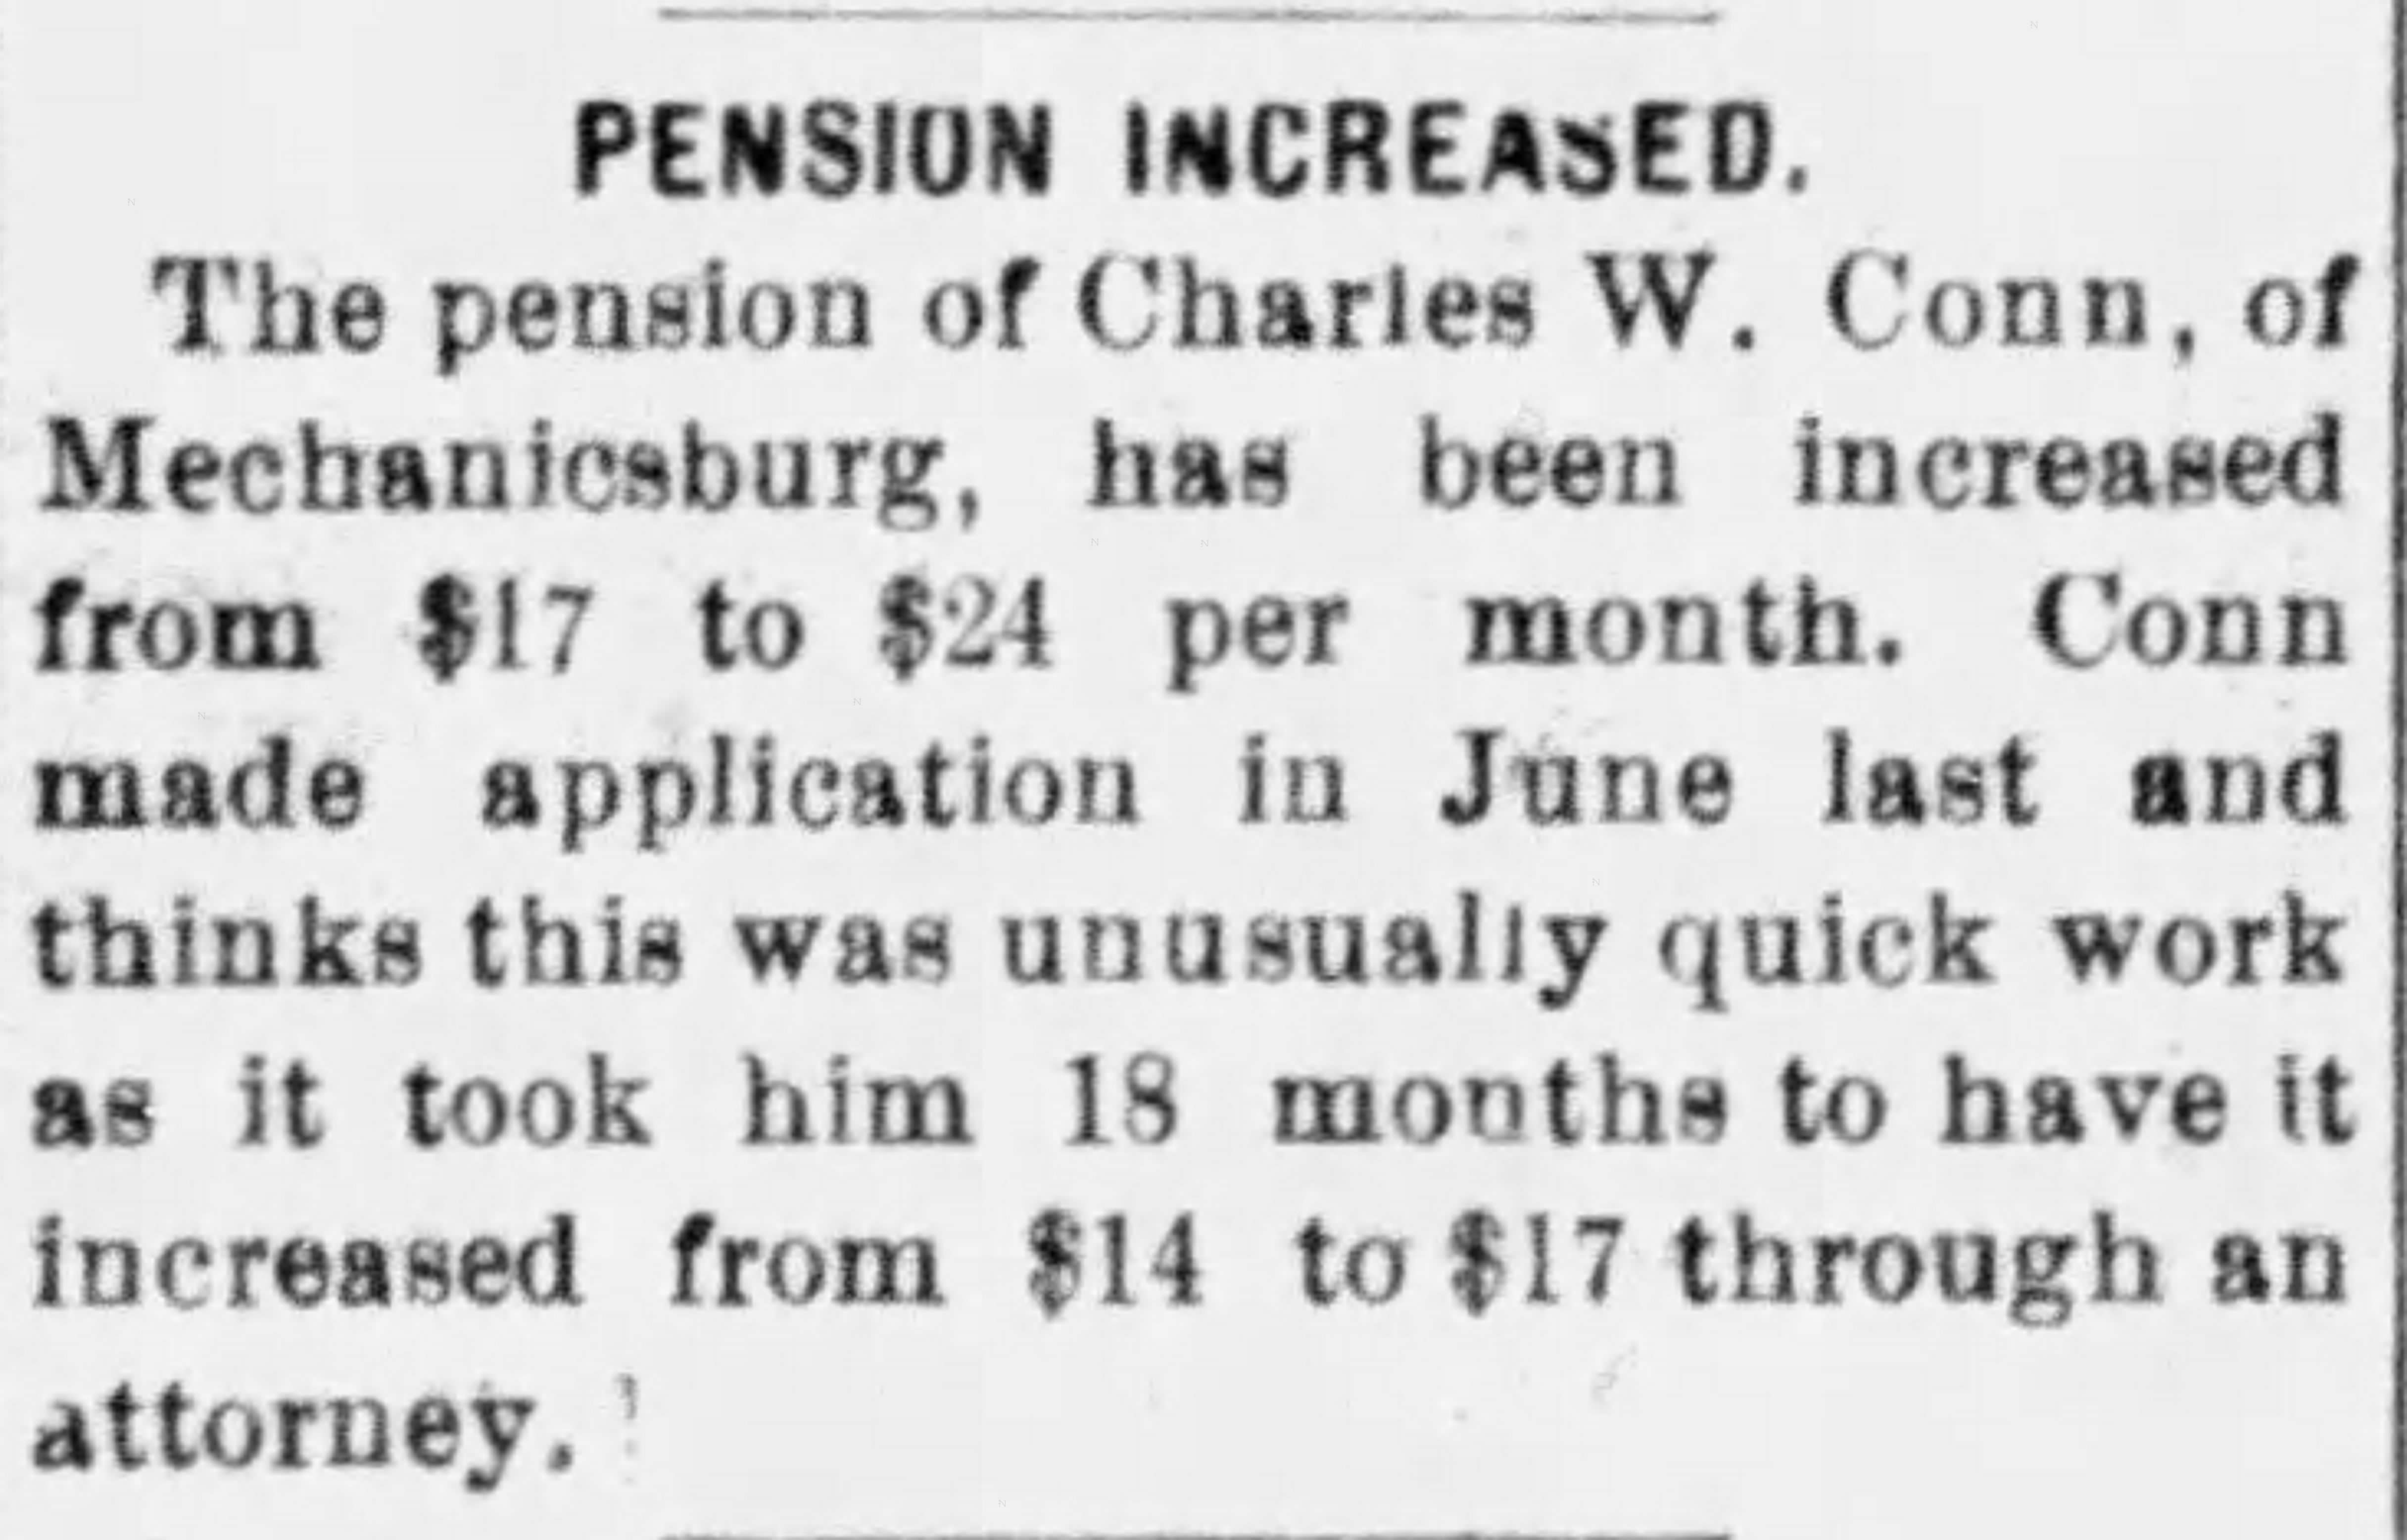 A newspaper article about Charles Conn's pension increase